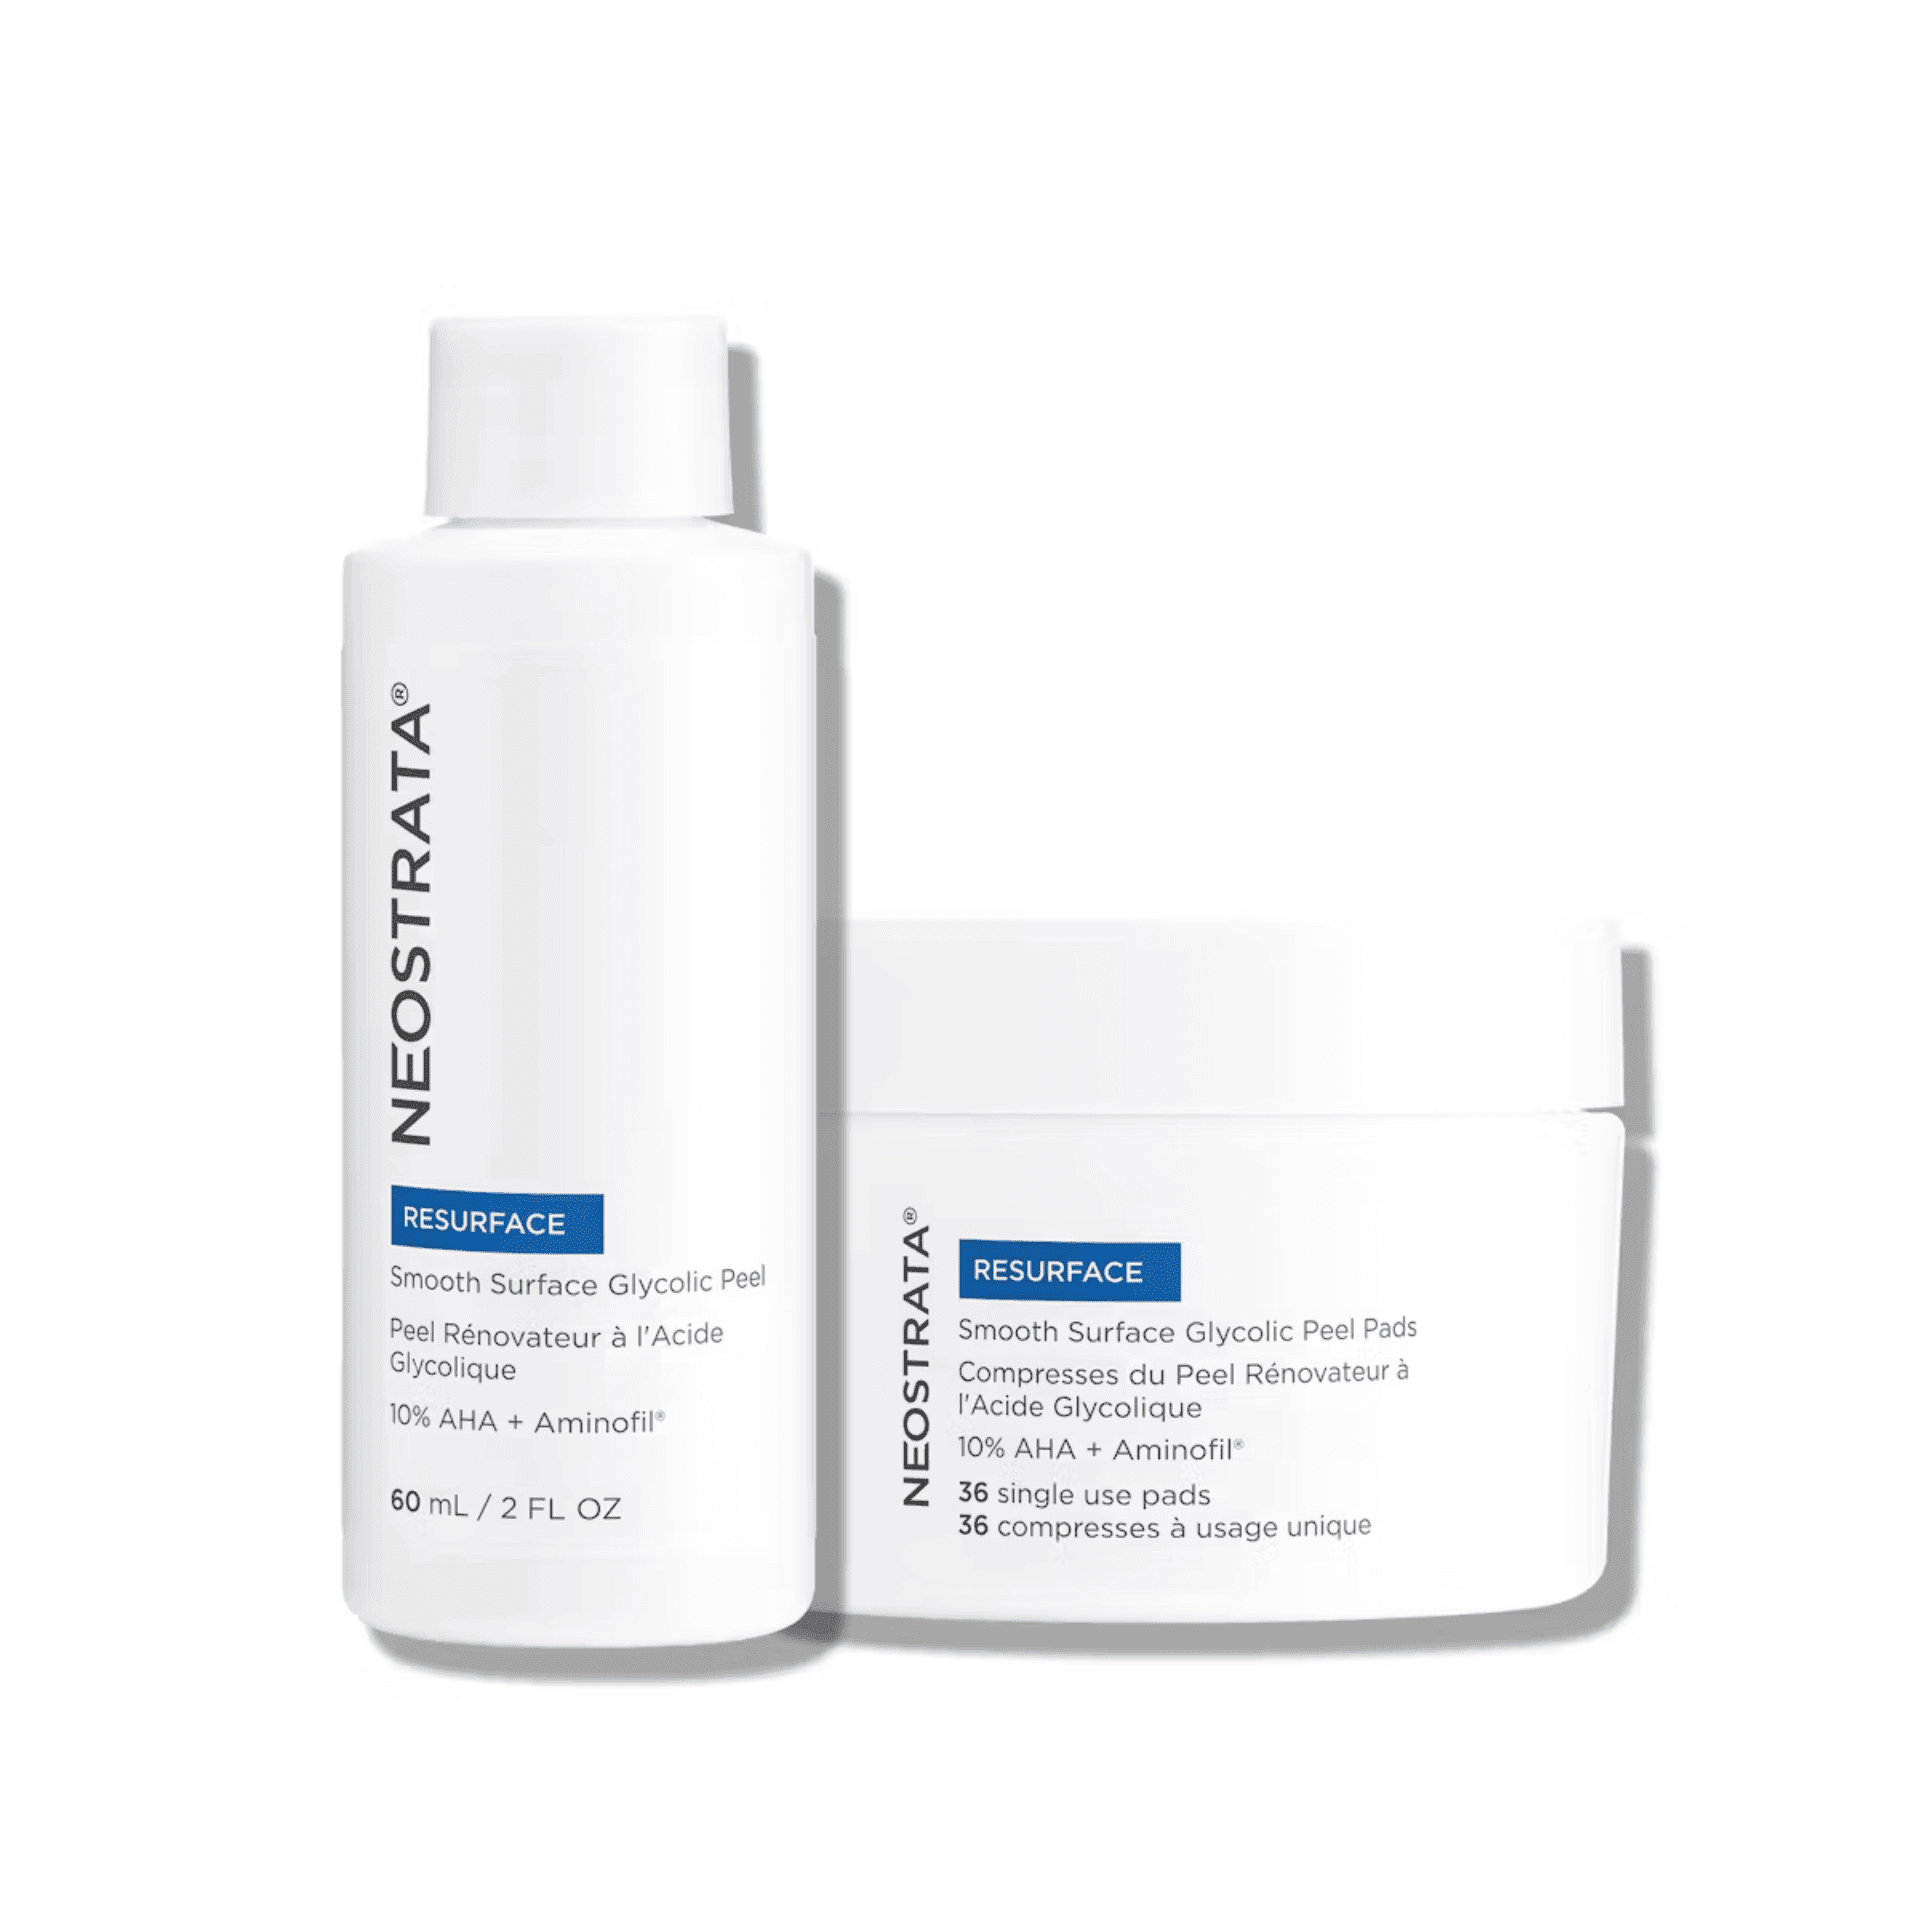 Neostrata Resurface Smooth Surface Glycolic Peel + Pads